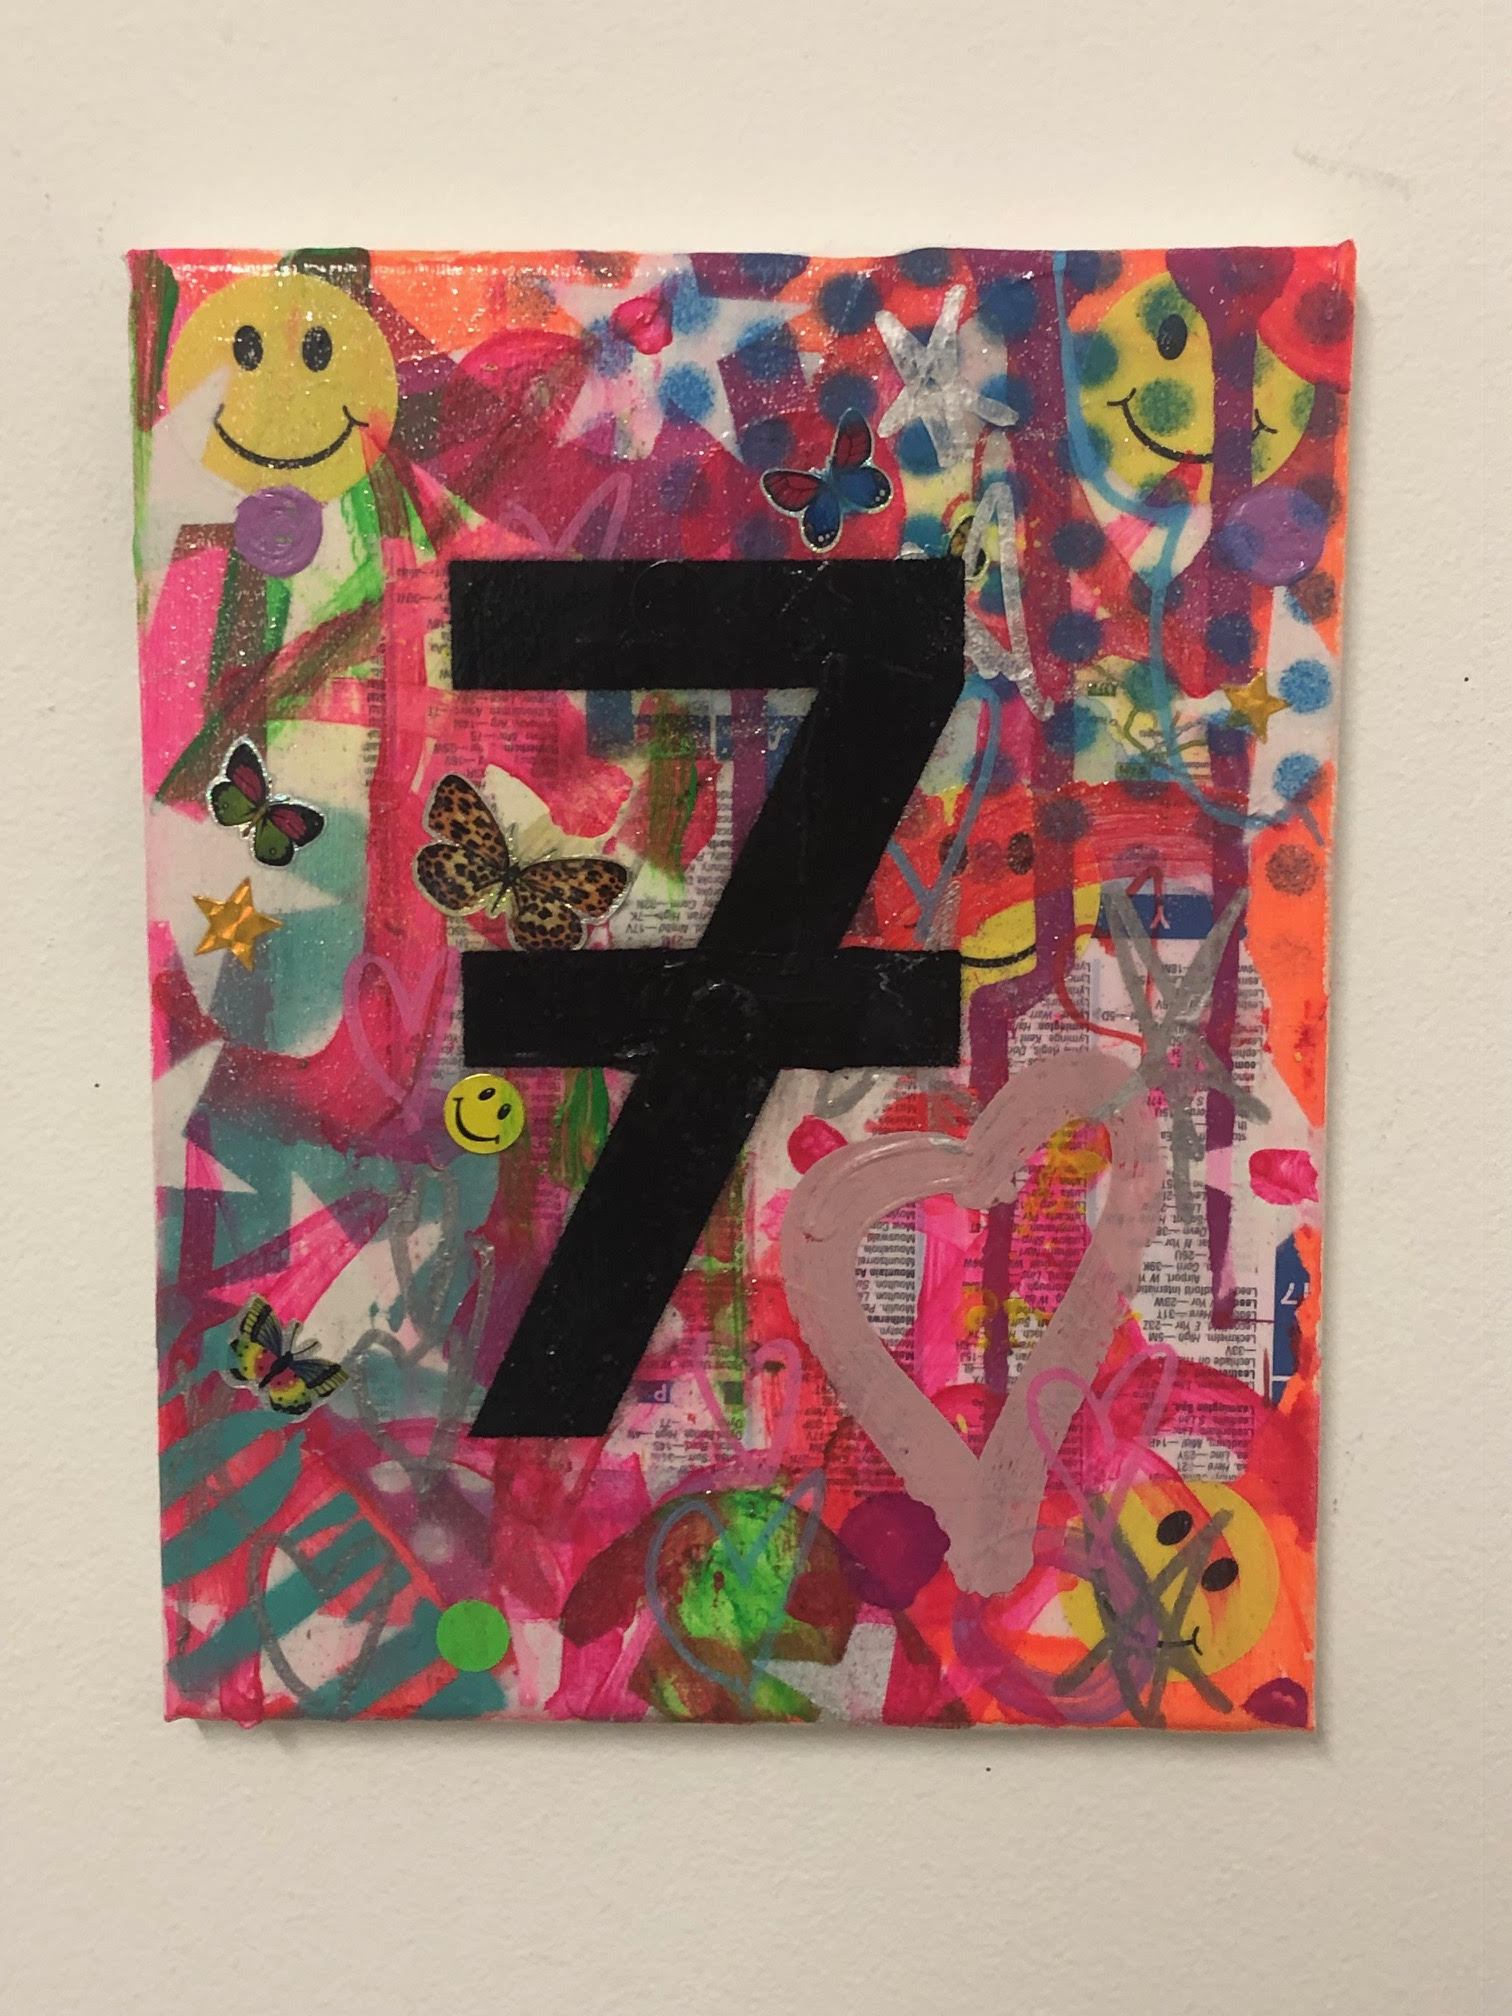 Lucky Number 7 by Barrie J Davies 2019, Mixed media on Canvas, 20cm x 25cm, Unframed. Barrie J Davies is an Artist - Urban Pop Art and Street art inspired Artist based in Brighton England UK - Pop Art Paintings, Street Art Prints & collectables.